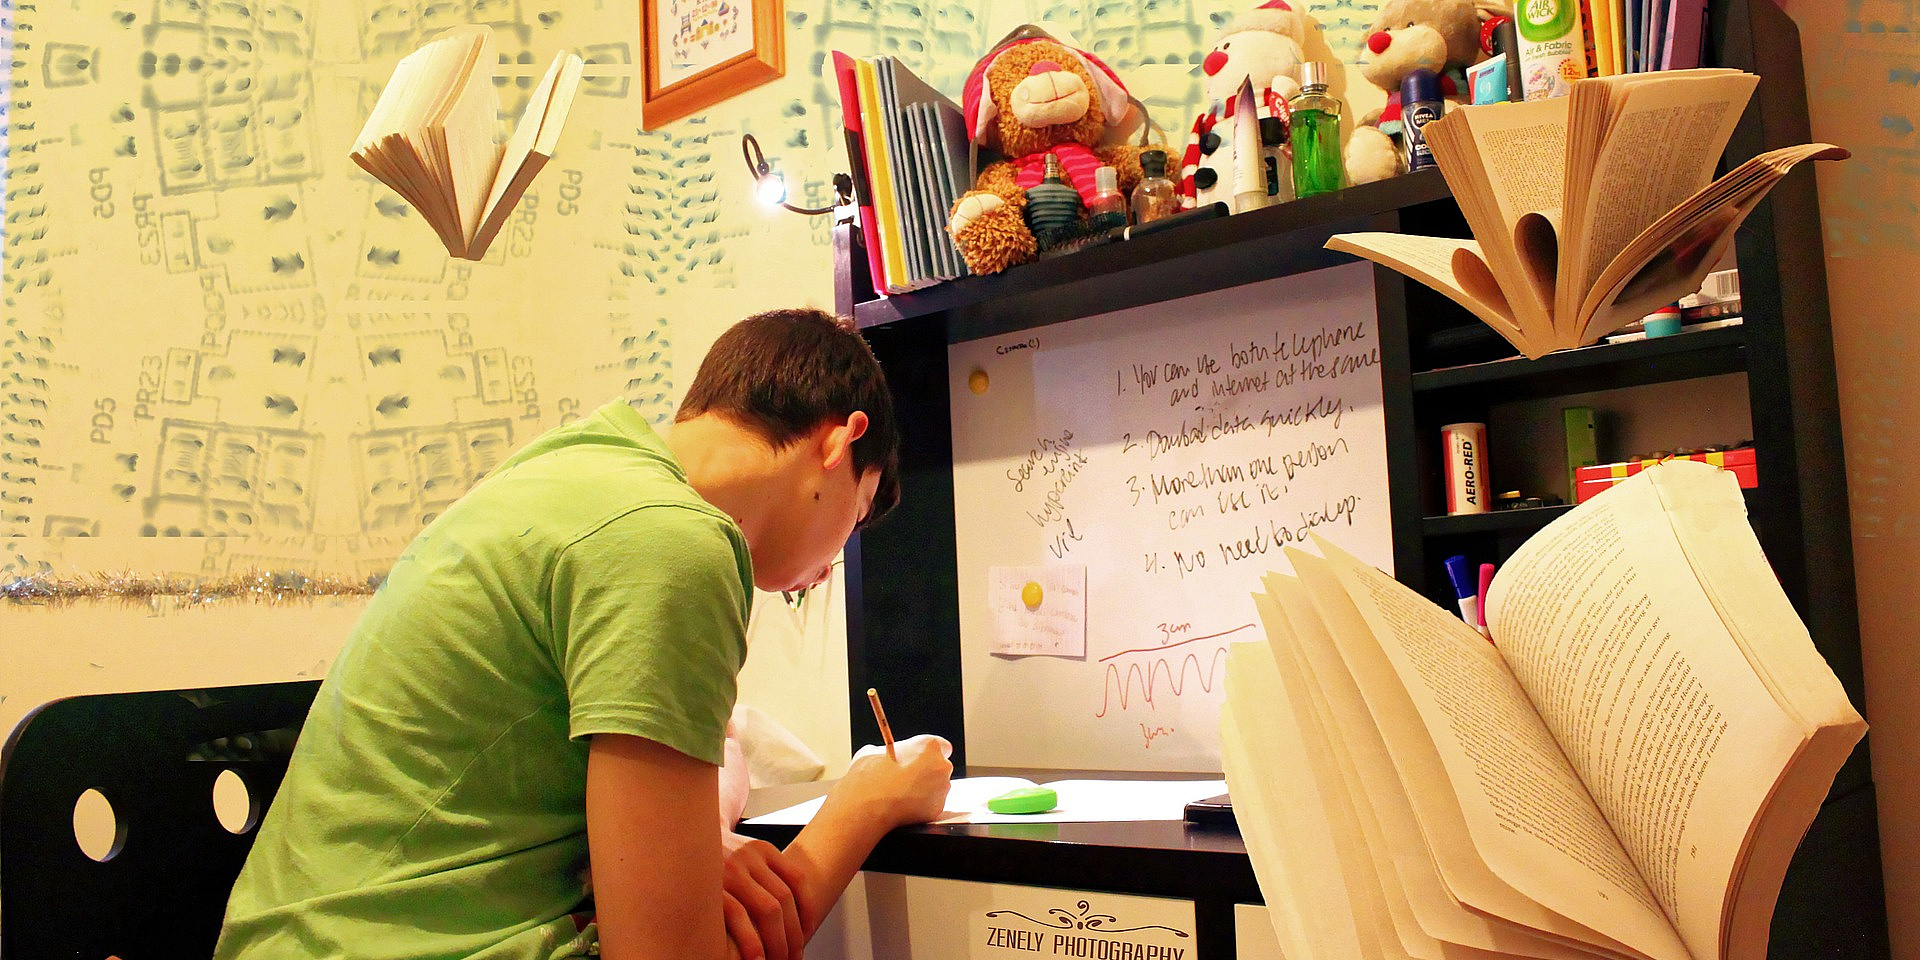 Student in a green shirt studying in his room